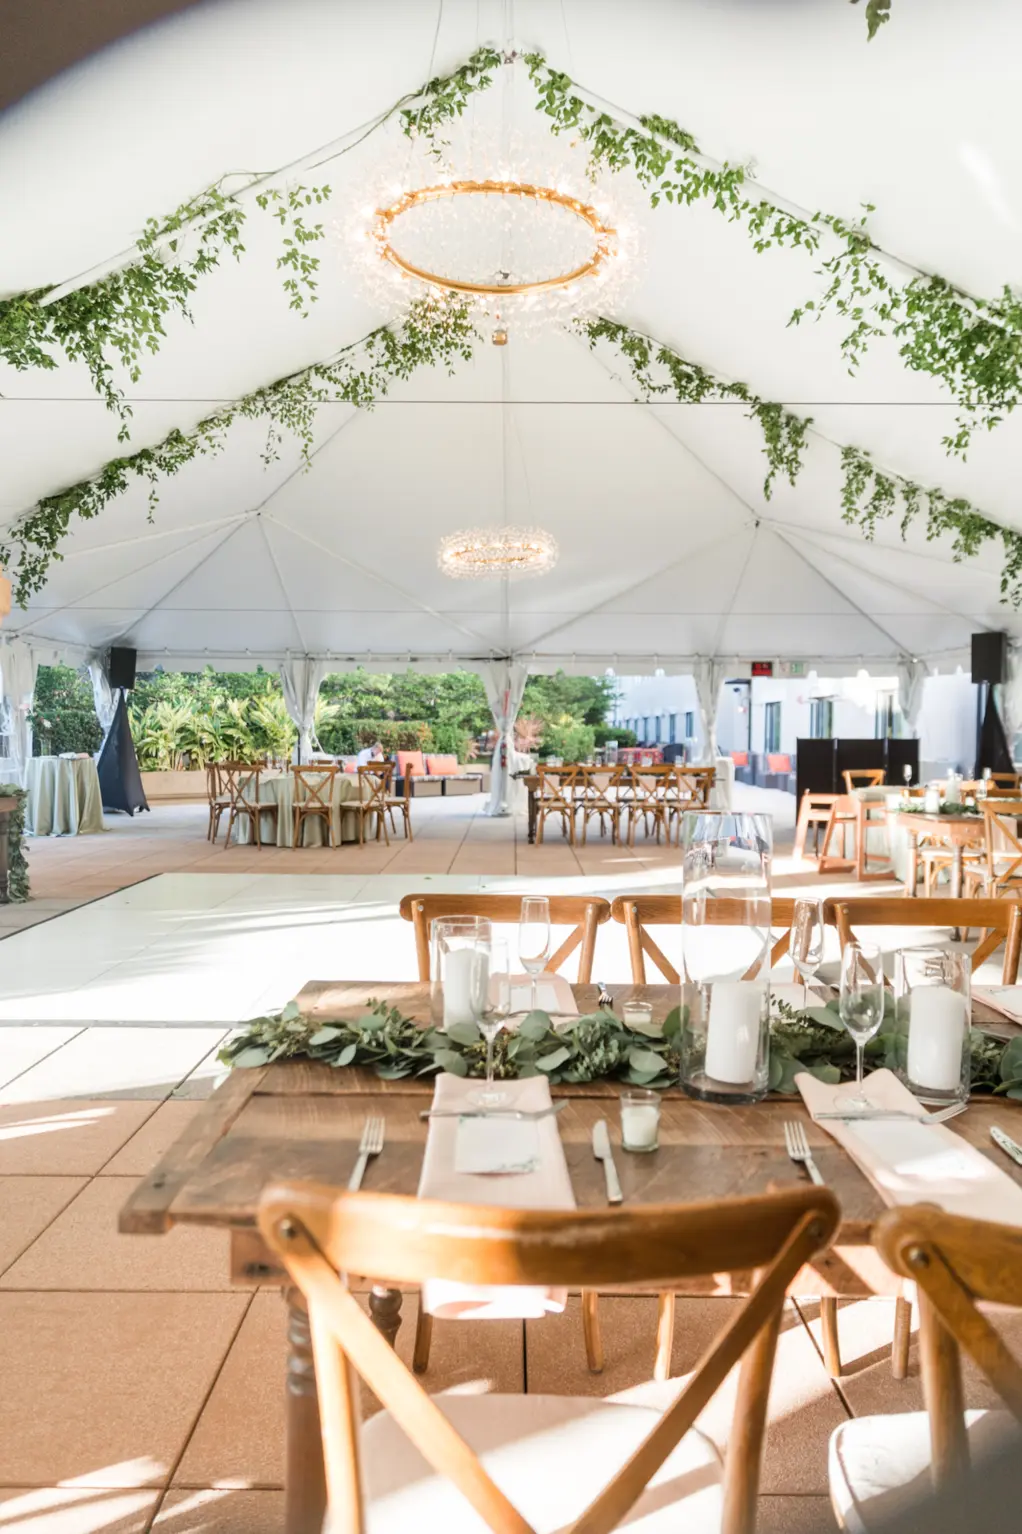 White Tented Boho Wedding Reception with Hanging Eucalyptus | White Dance Floor | Farmhouse Tables and Wooden Crossback Chairs | Tampa Bay Kate Ryan Event Rentals | Venue The Epicurean